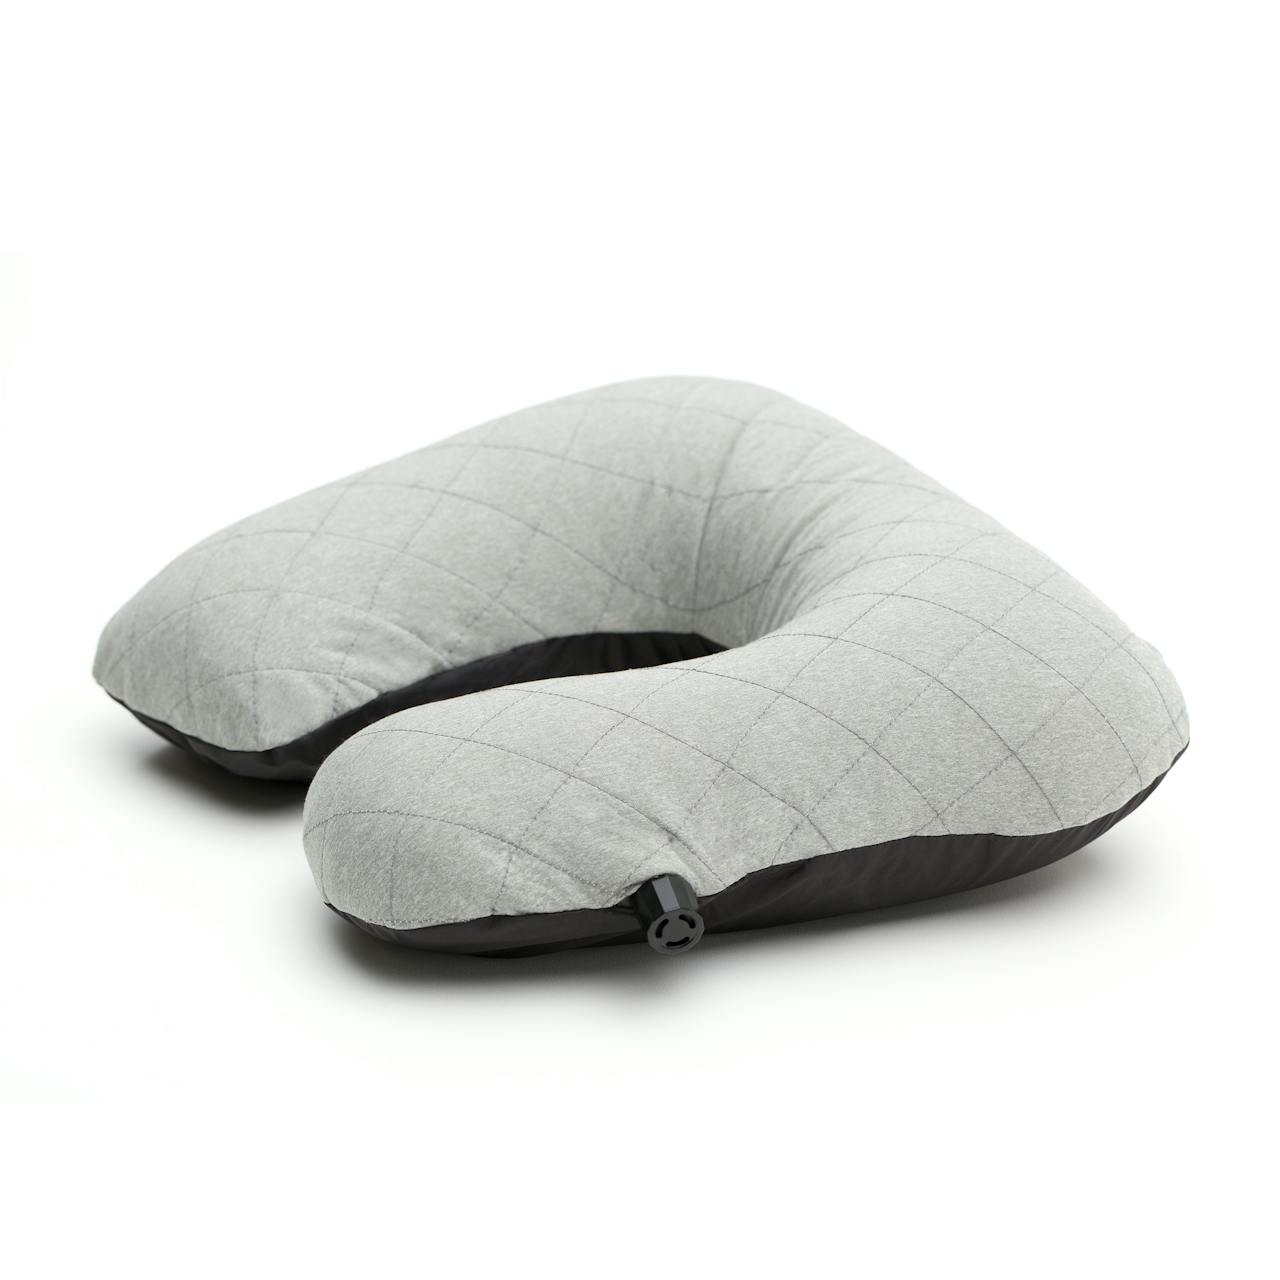 Everyman Packable Self-Inflating Travel Pillow